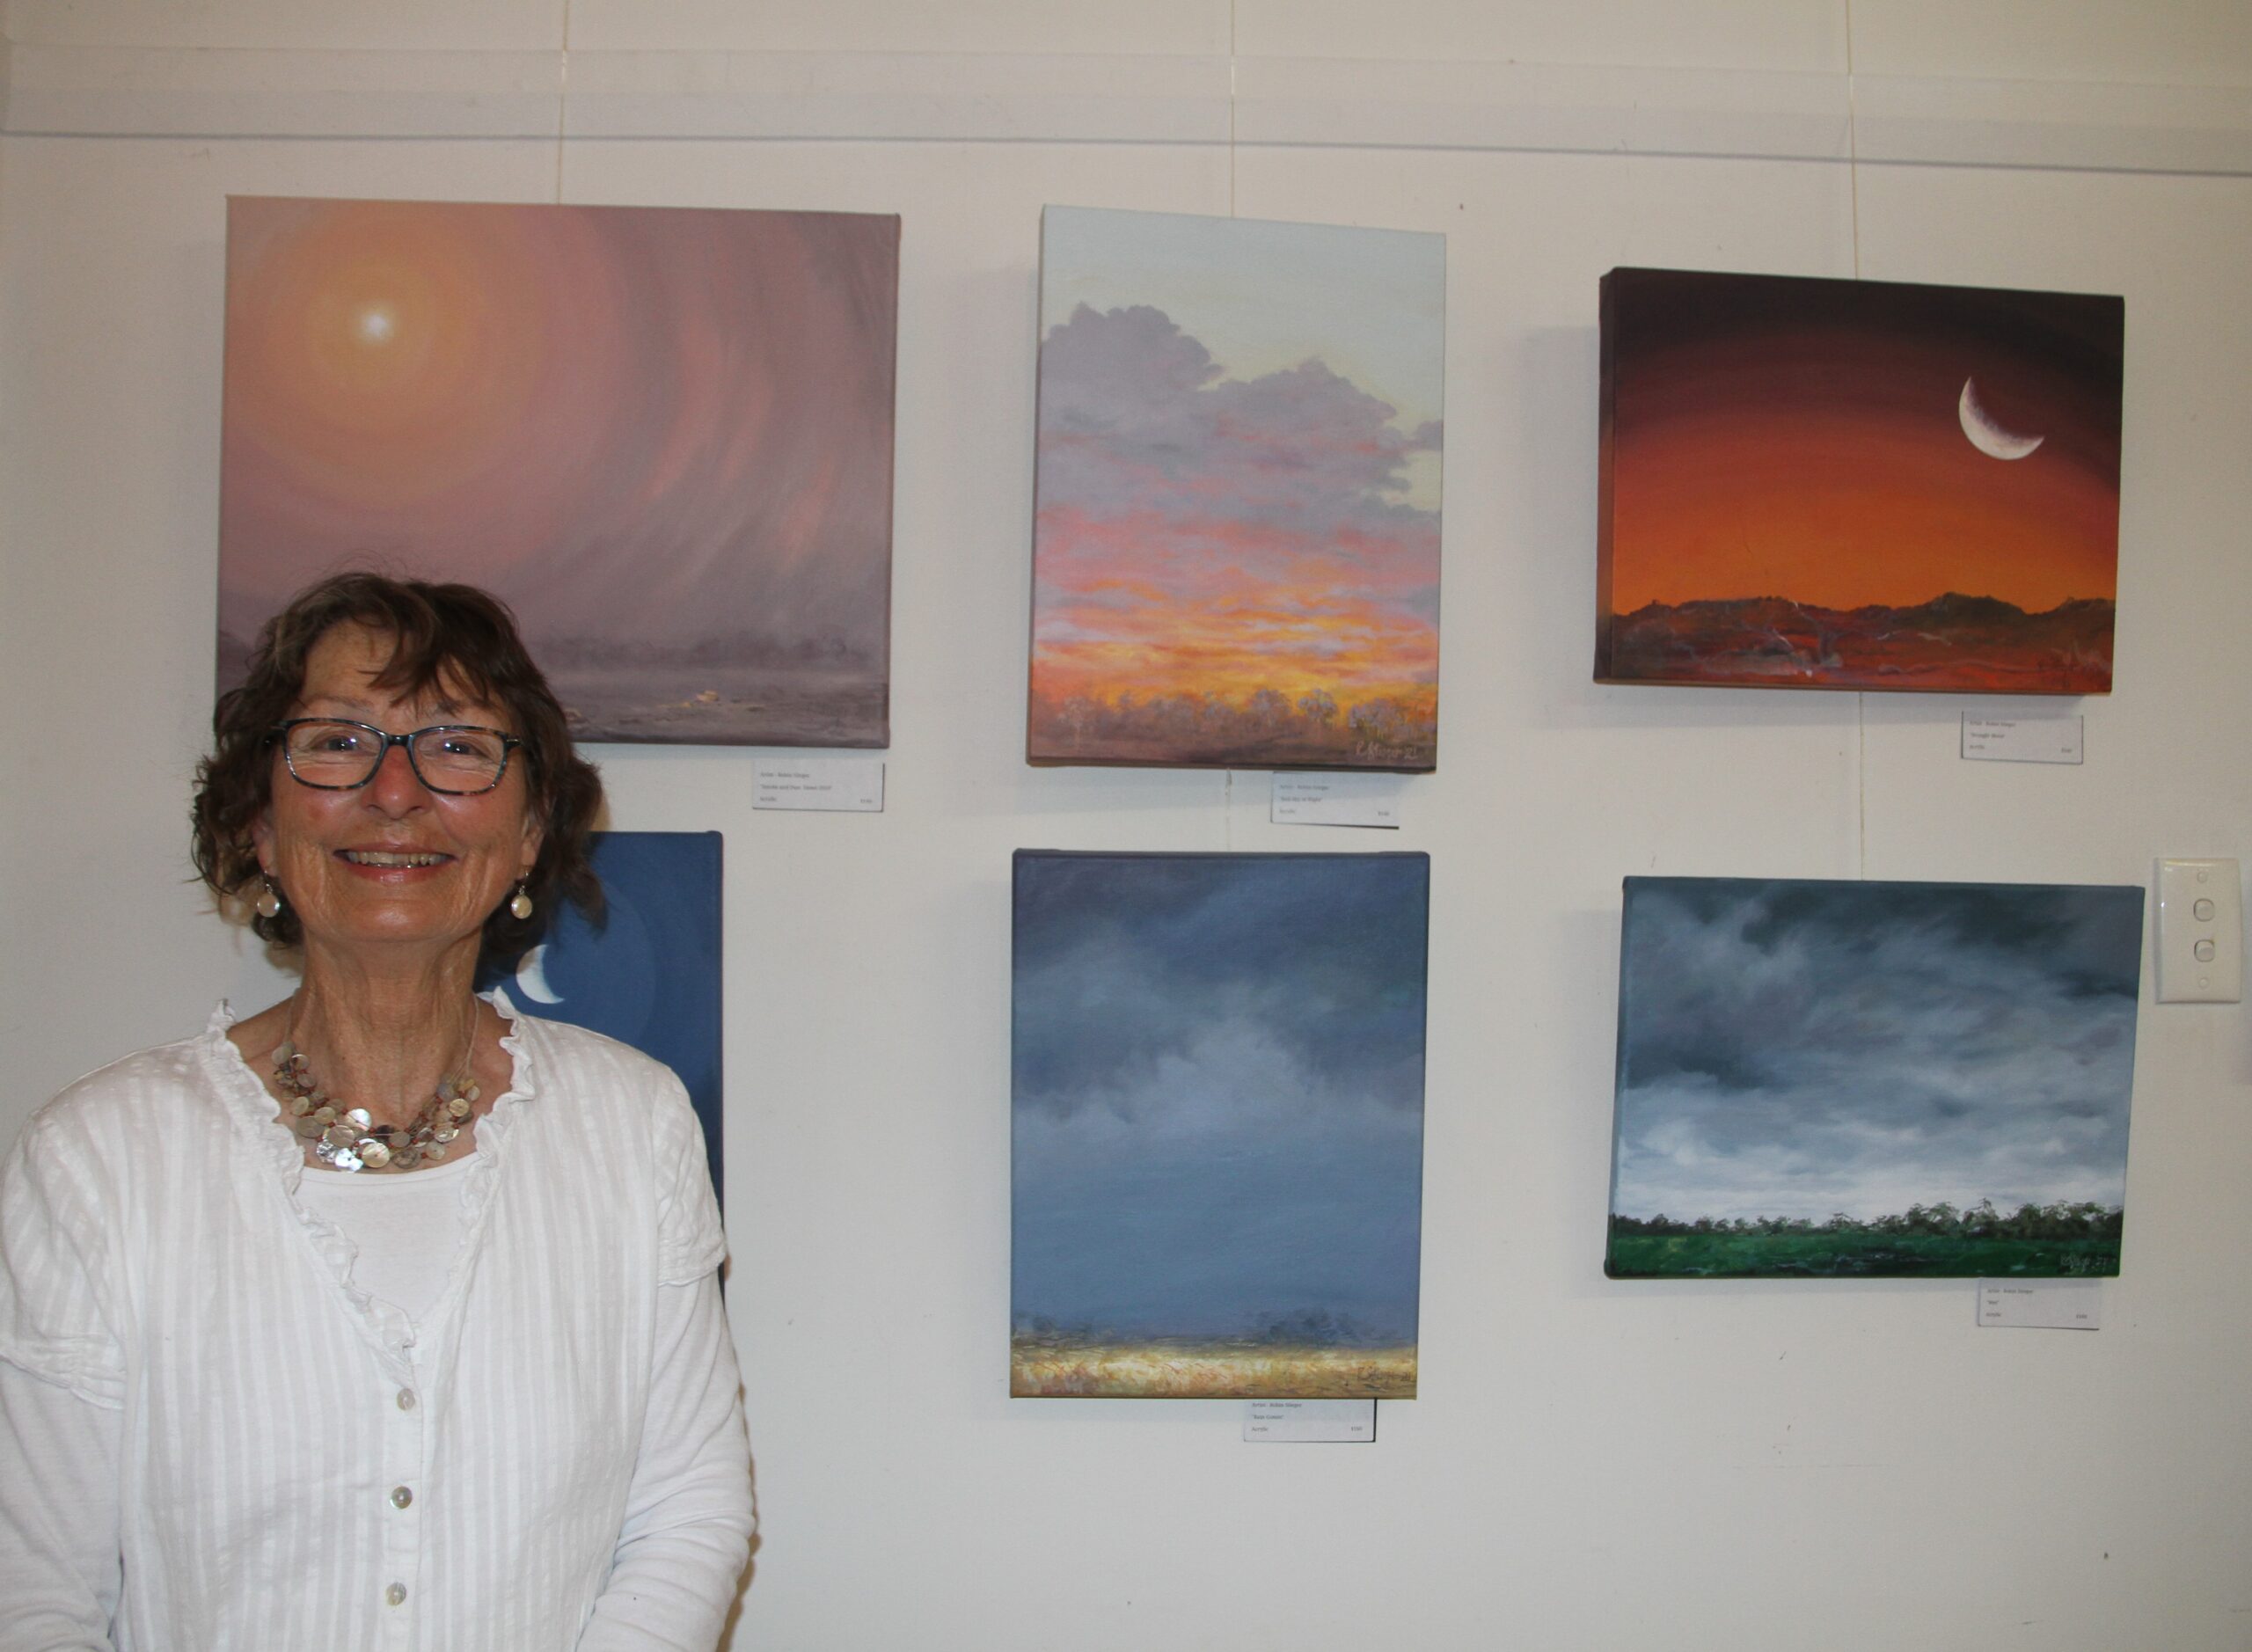 Robin Stieger with her exhibits, top from left, ‘Smoke and Dust. Dawn 2019’, ‘Red Sky at Night’, ‘Drought Moon’, bottom from left, ‘Tipping Moon’, ‘Rain Comin’ and ‘Wet’, all in acrylics.